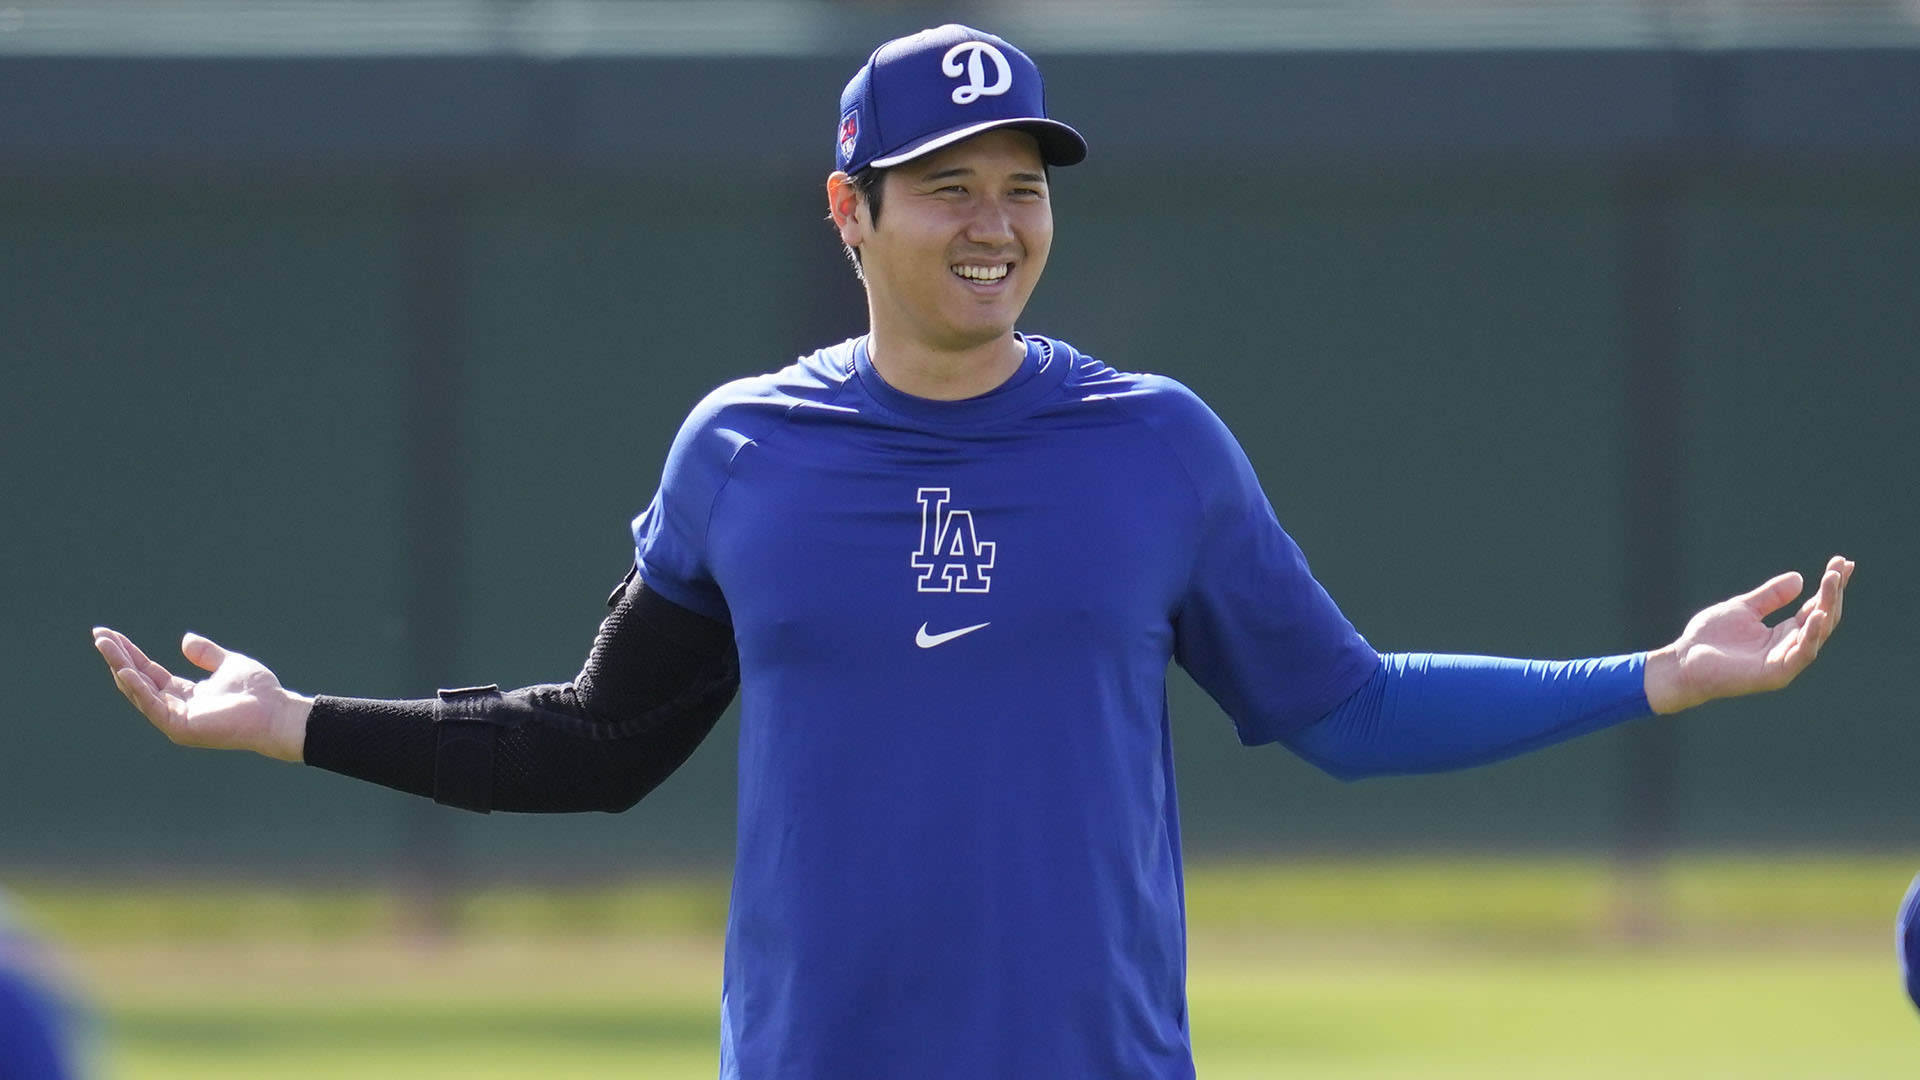 Shohei Ohtani debuts with the Dodgers today